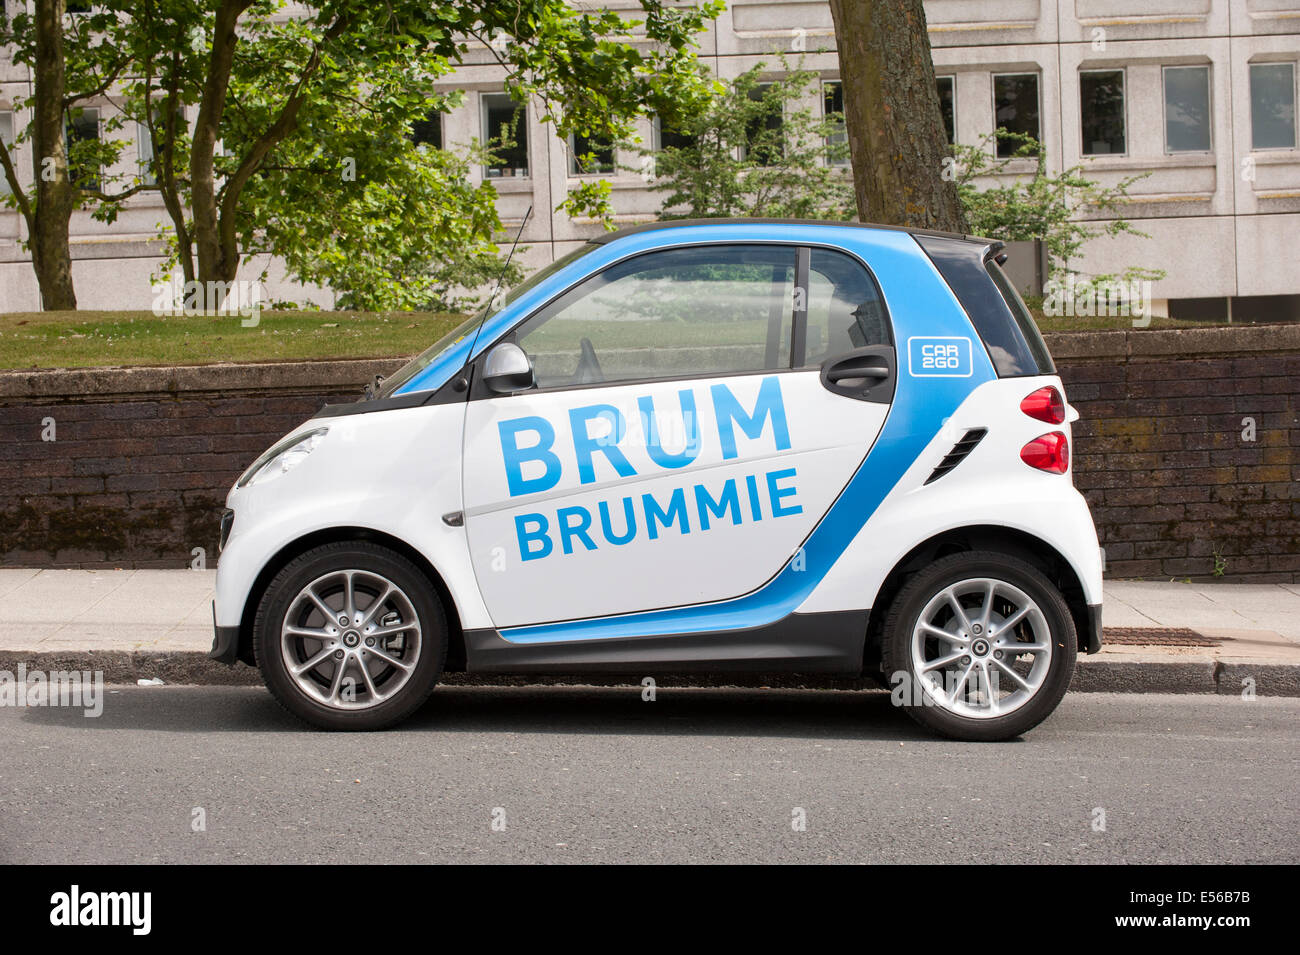 Brum Brummie the pay per hour city hire car to go Stock Photo - Alamy